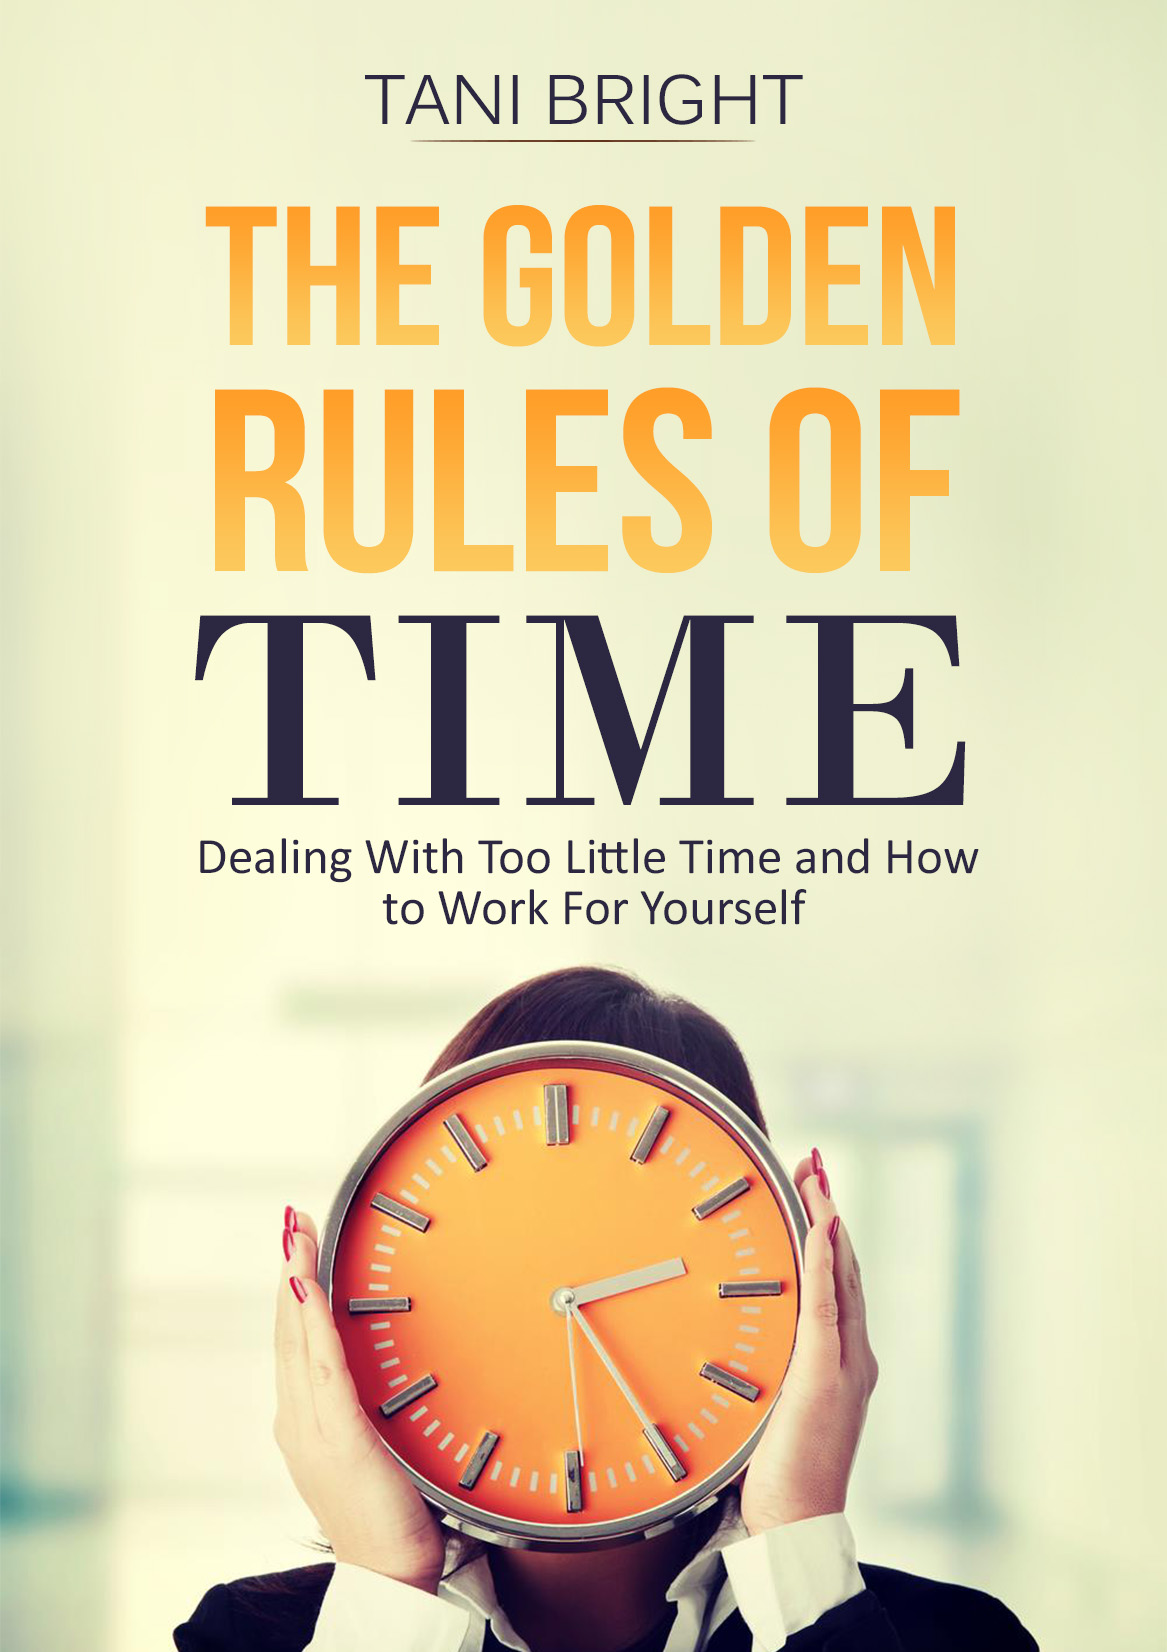 FREE: The Golden Rules of Time: Dealing With Too Little Time and How to Work For Yourself by Tani Bright